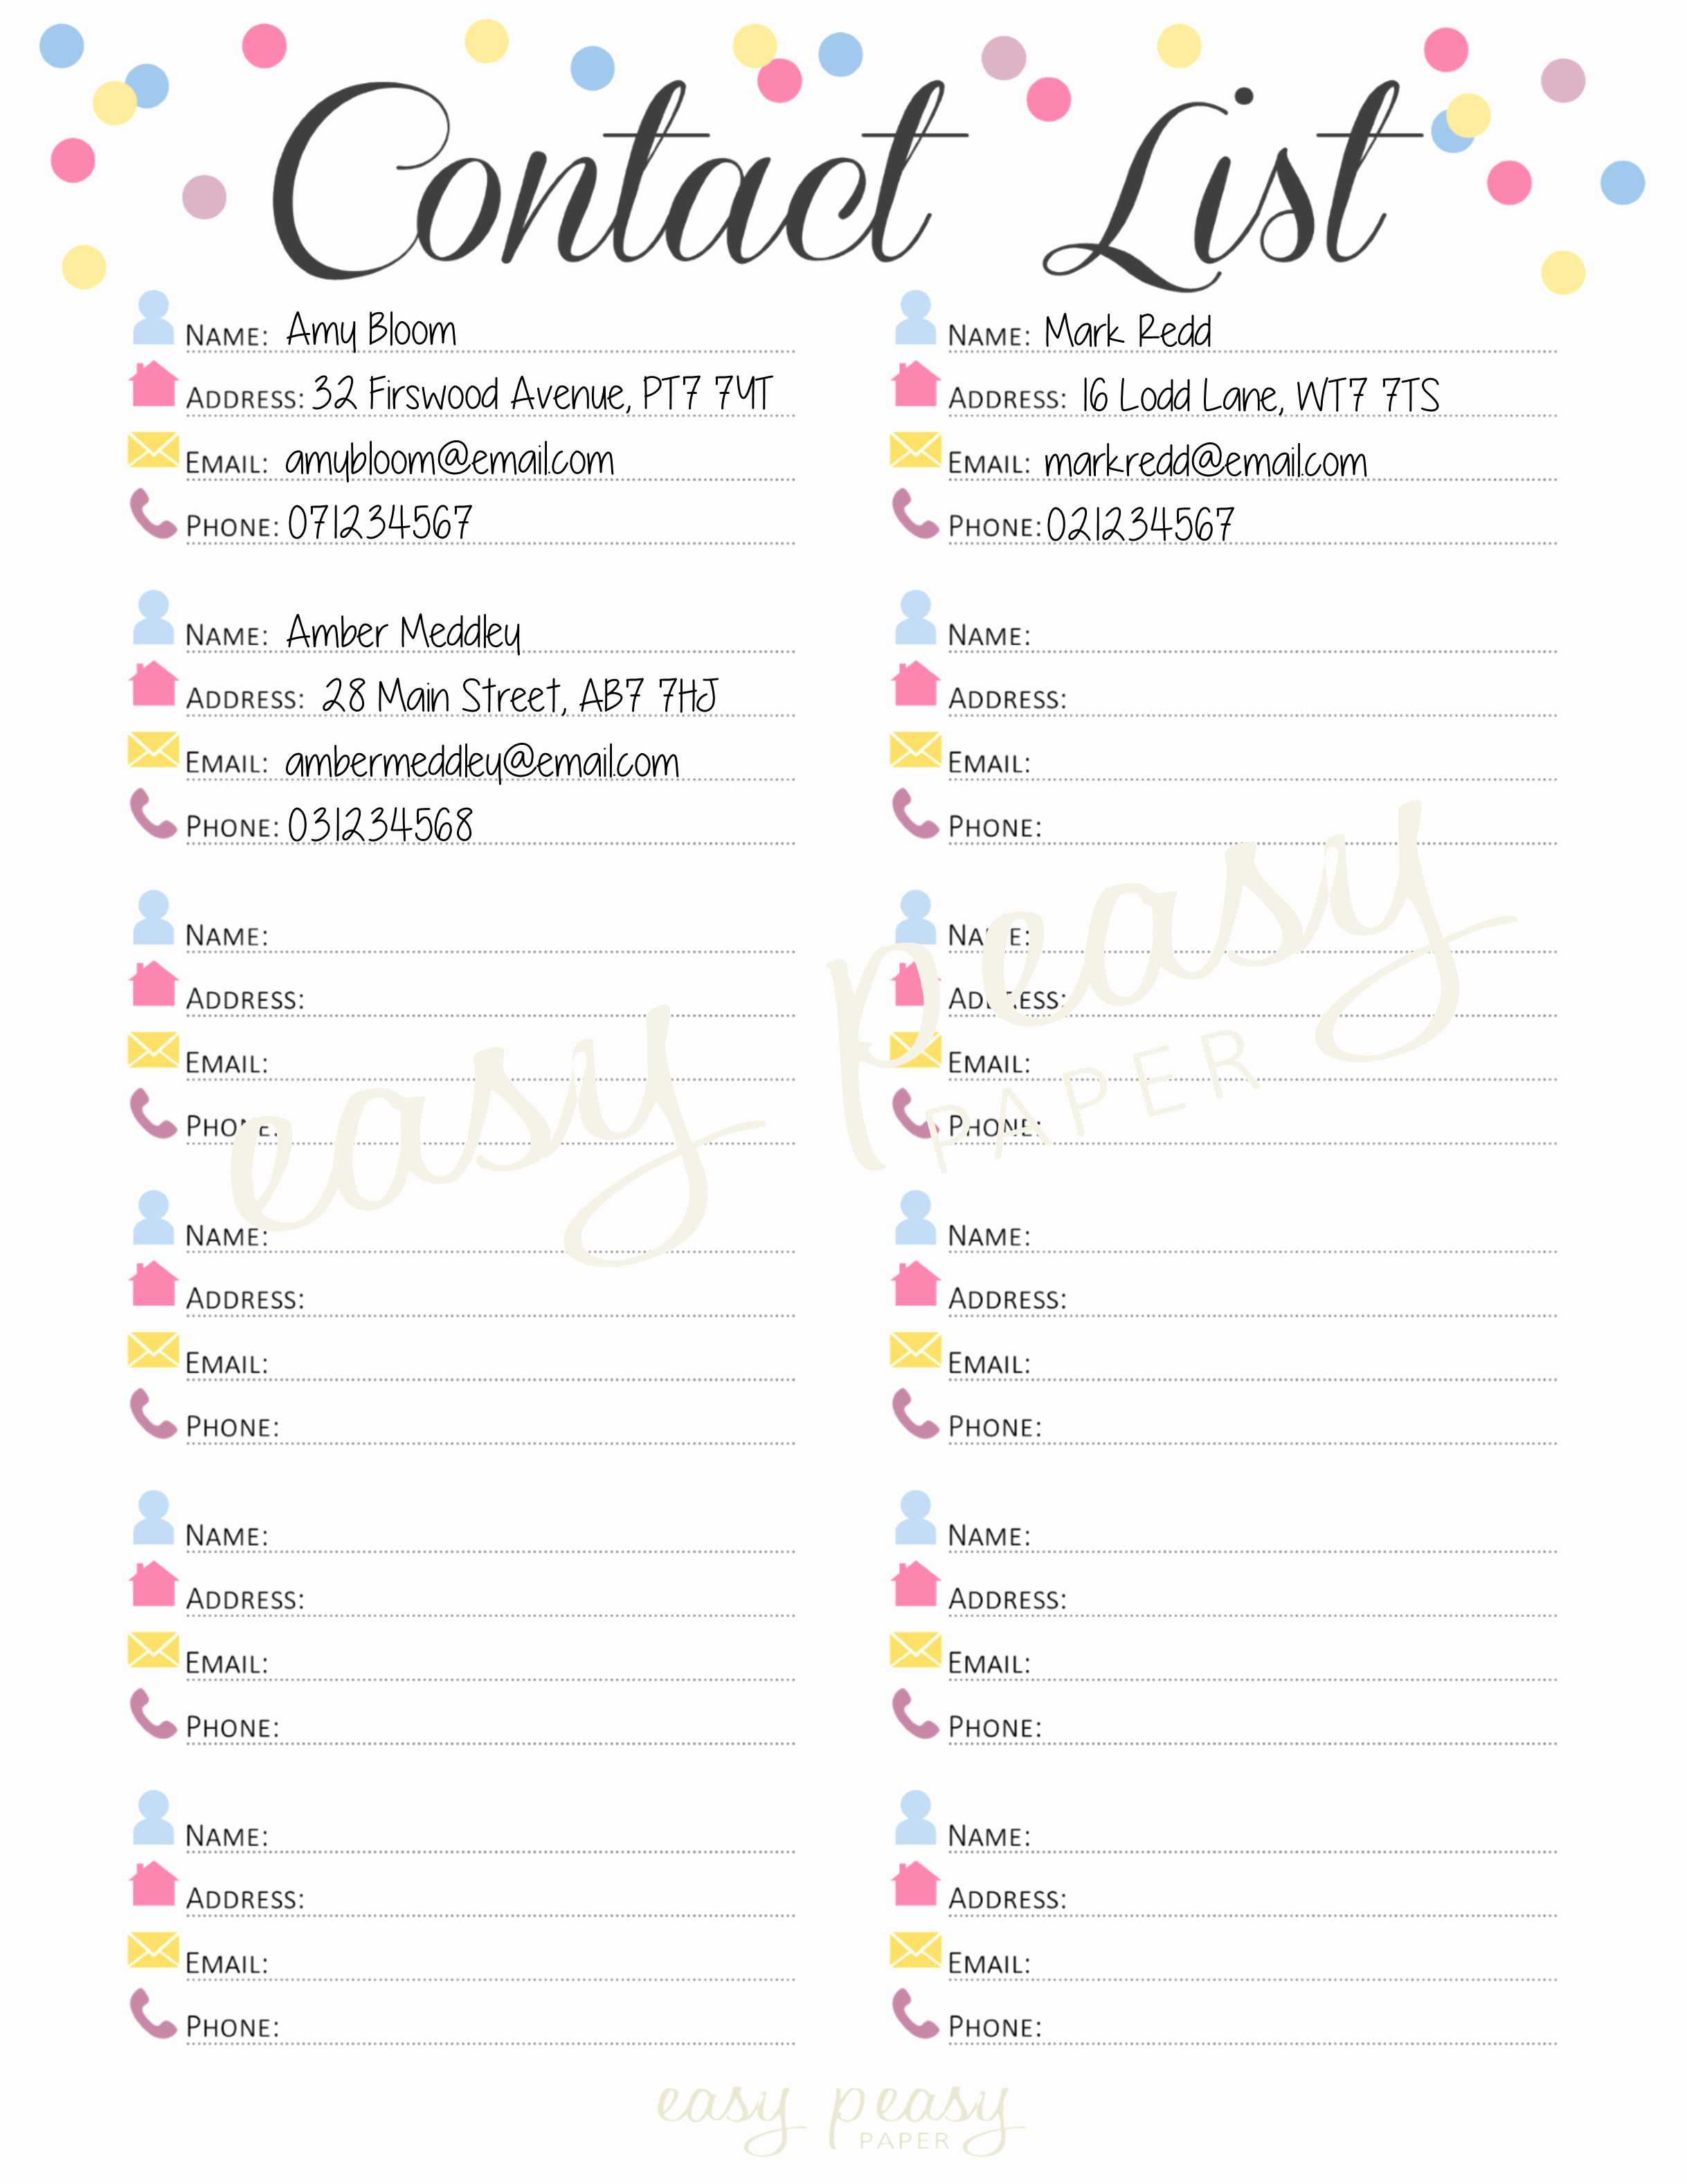 Phone Contact List Template Luxury Contact List Printable From Easy Peasy Paper